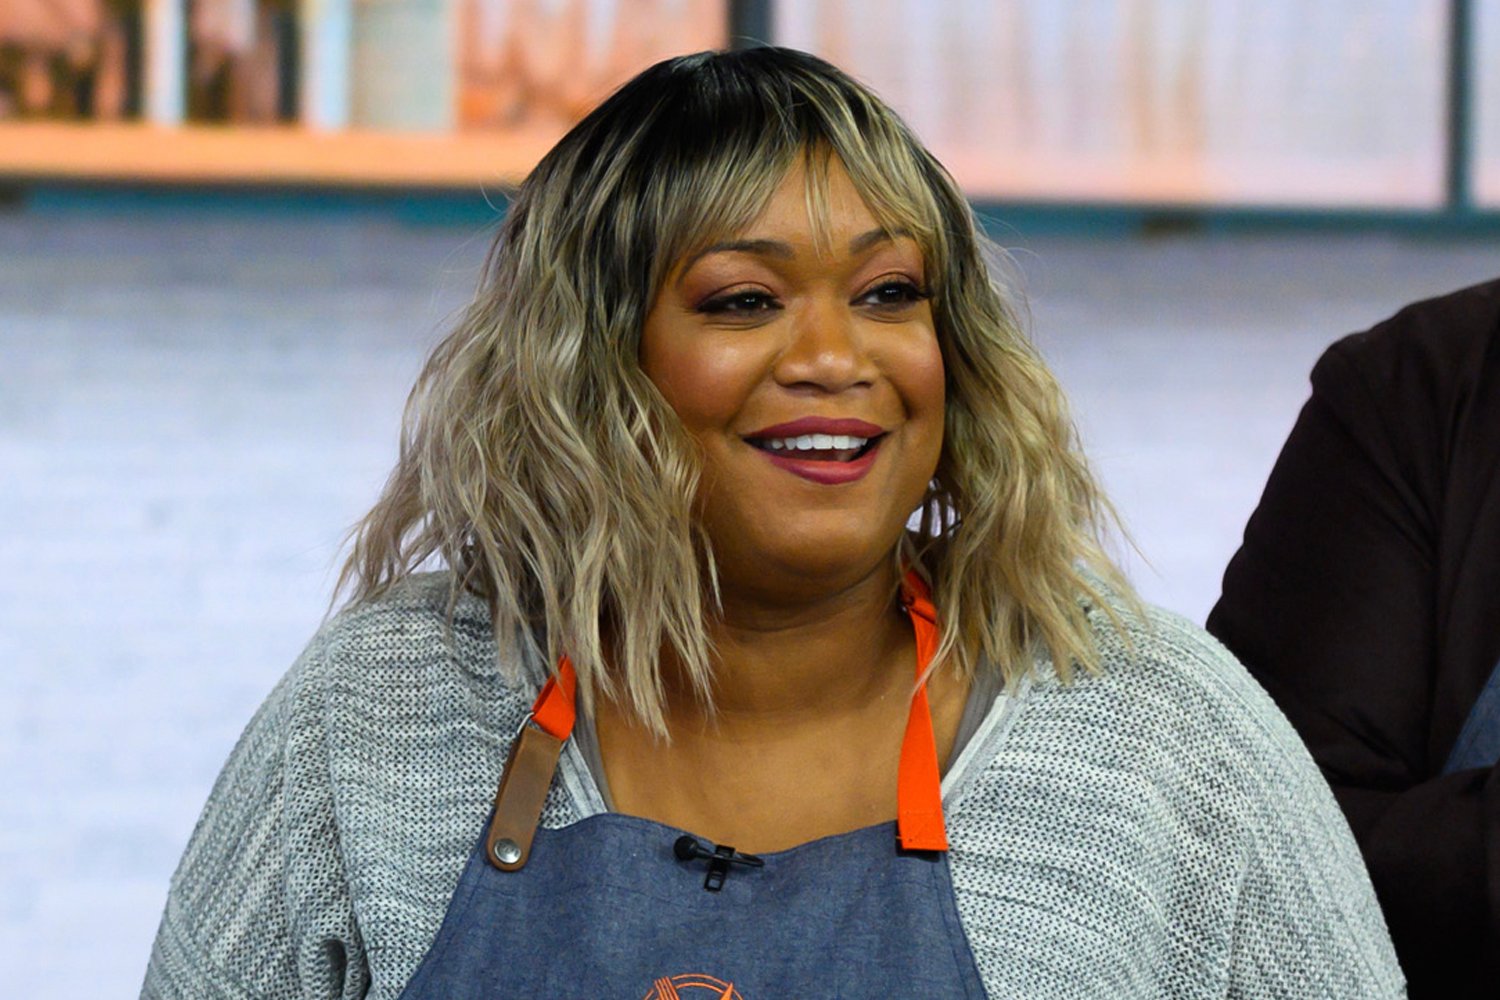 Food Network Star Sunny Anderson Finally Shares Photo Inside ‘The Kitchen’ but ‘Haters Will Say This Is Photoshopped’